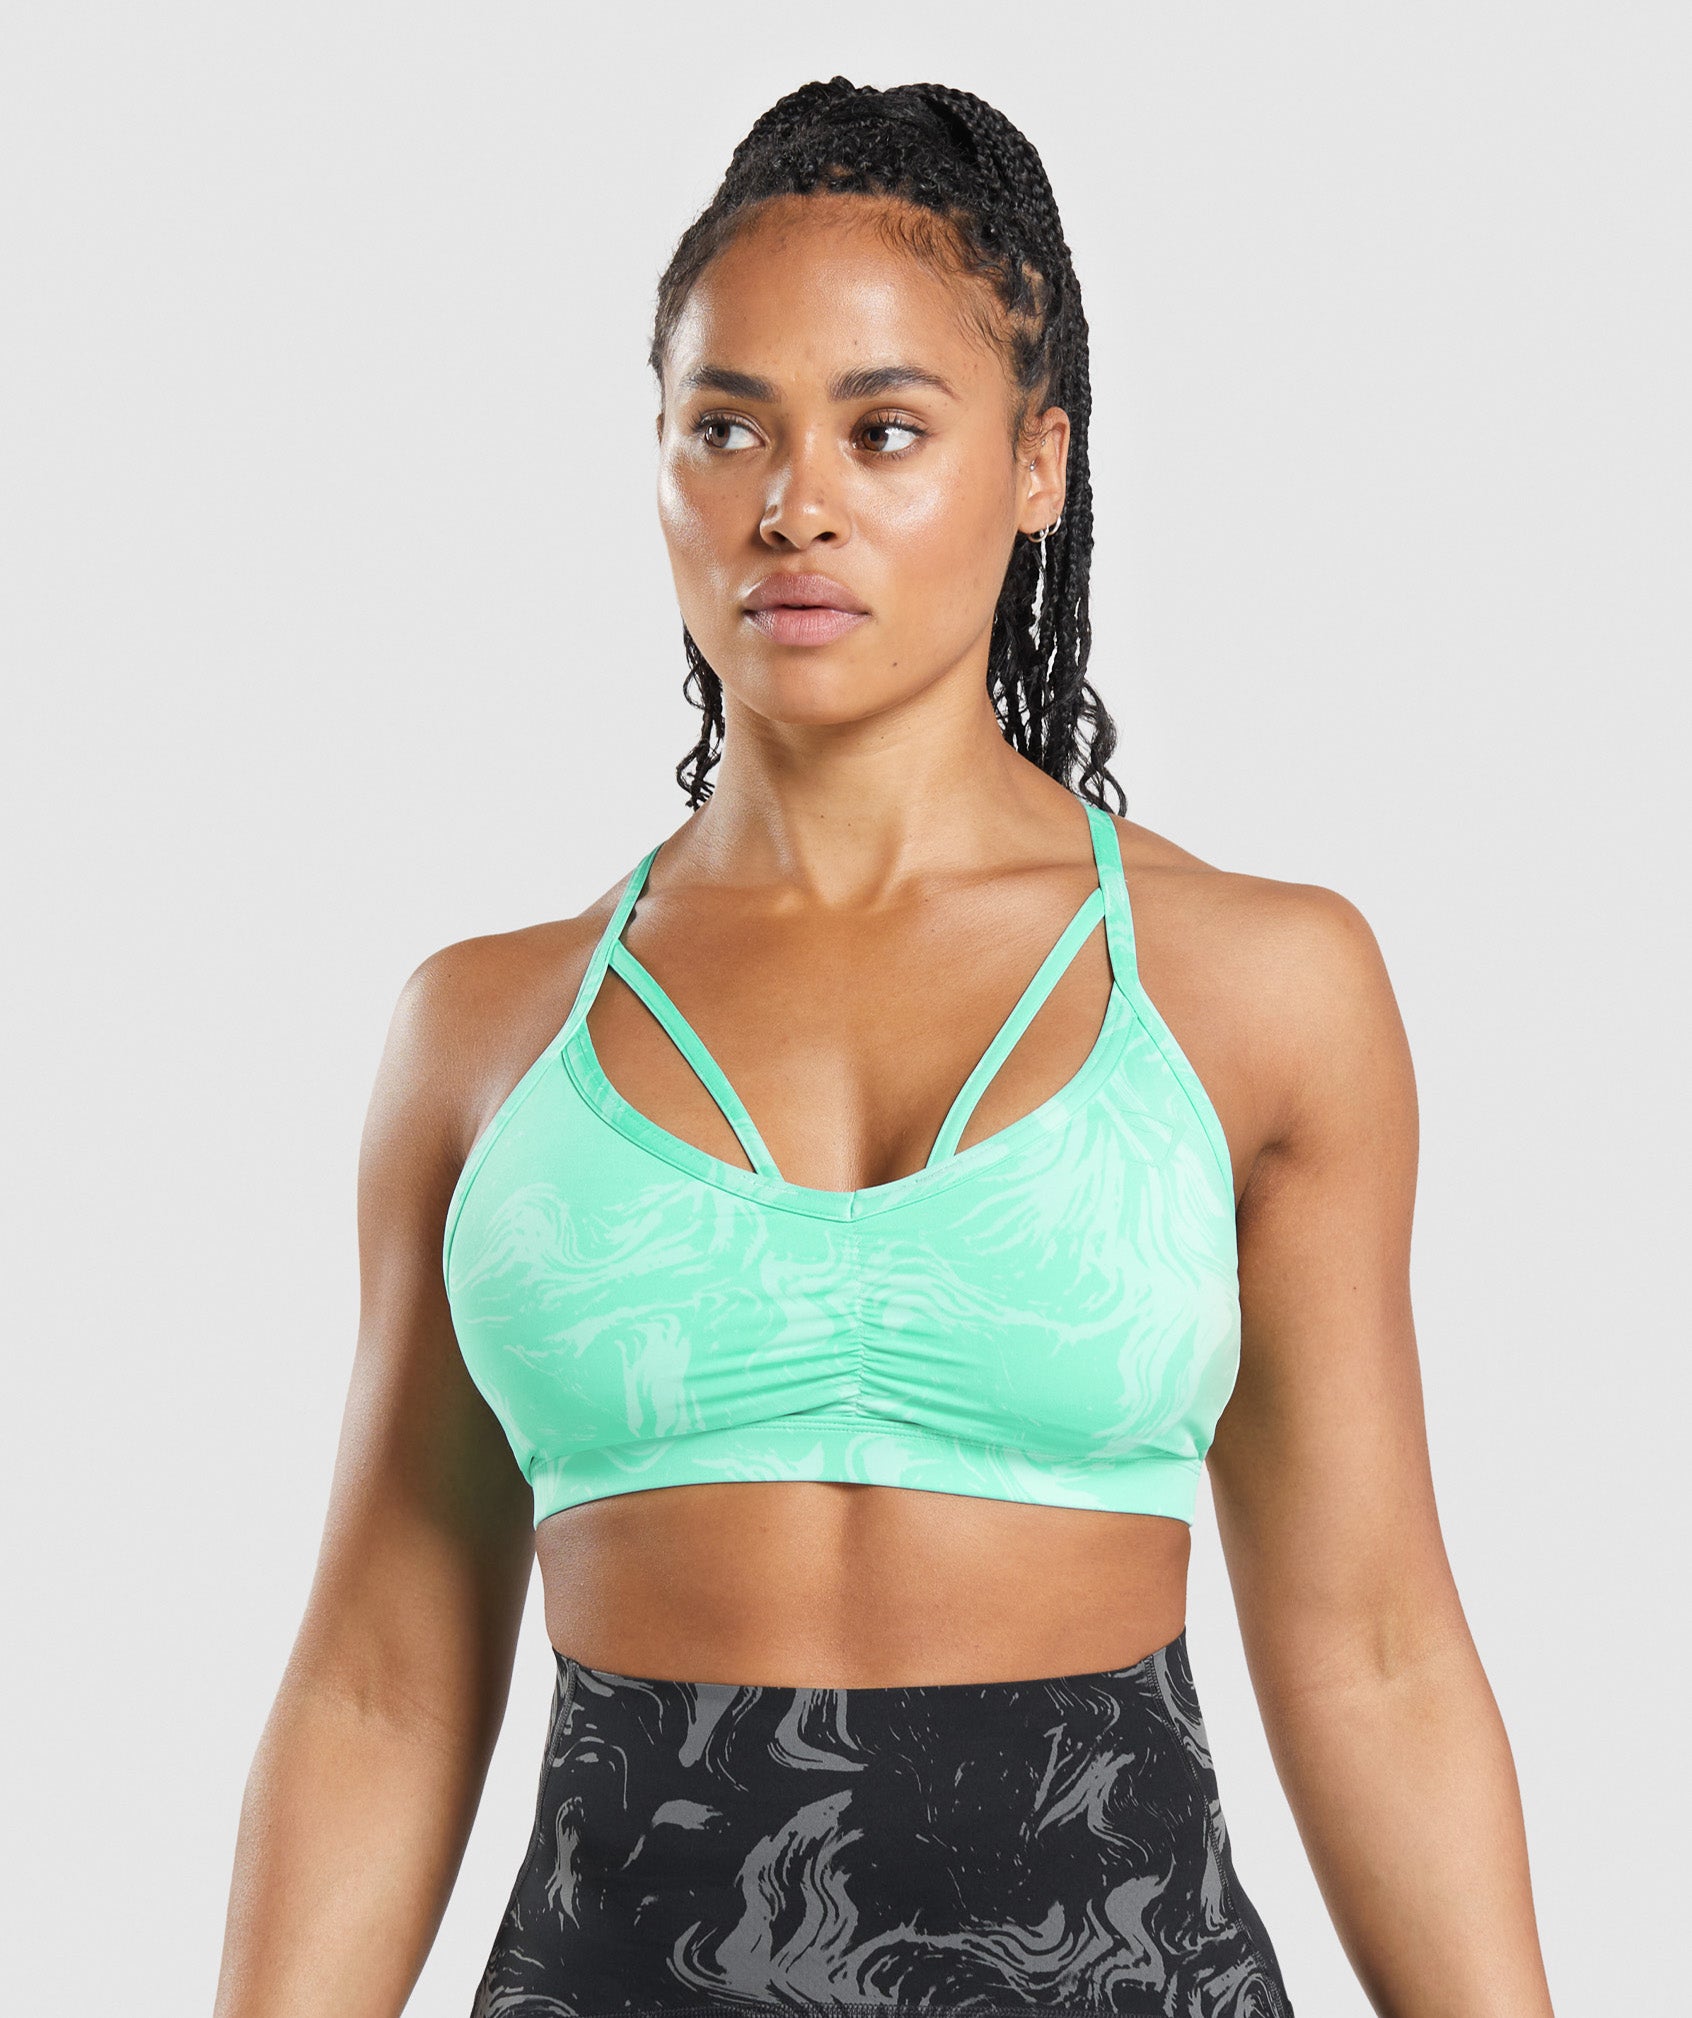 Women's Printed Activewear Sports Bra - Abstract Grid Printed, S 